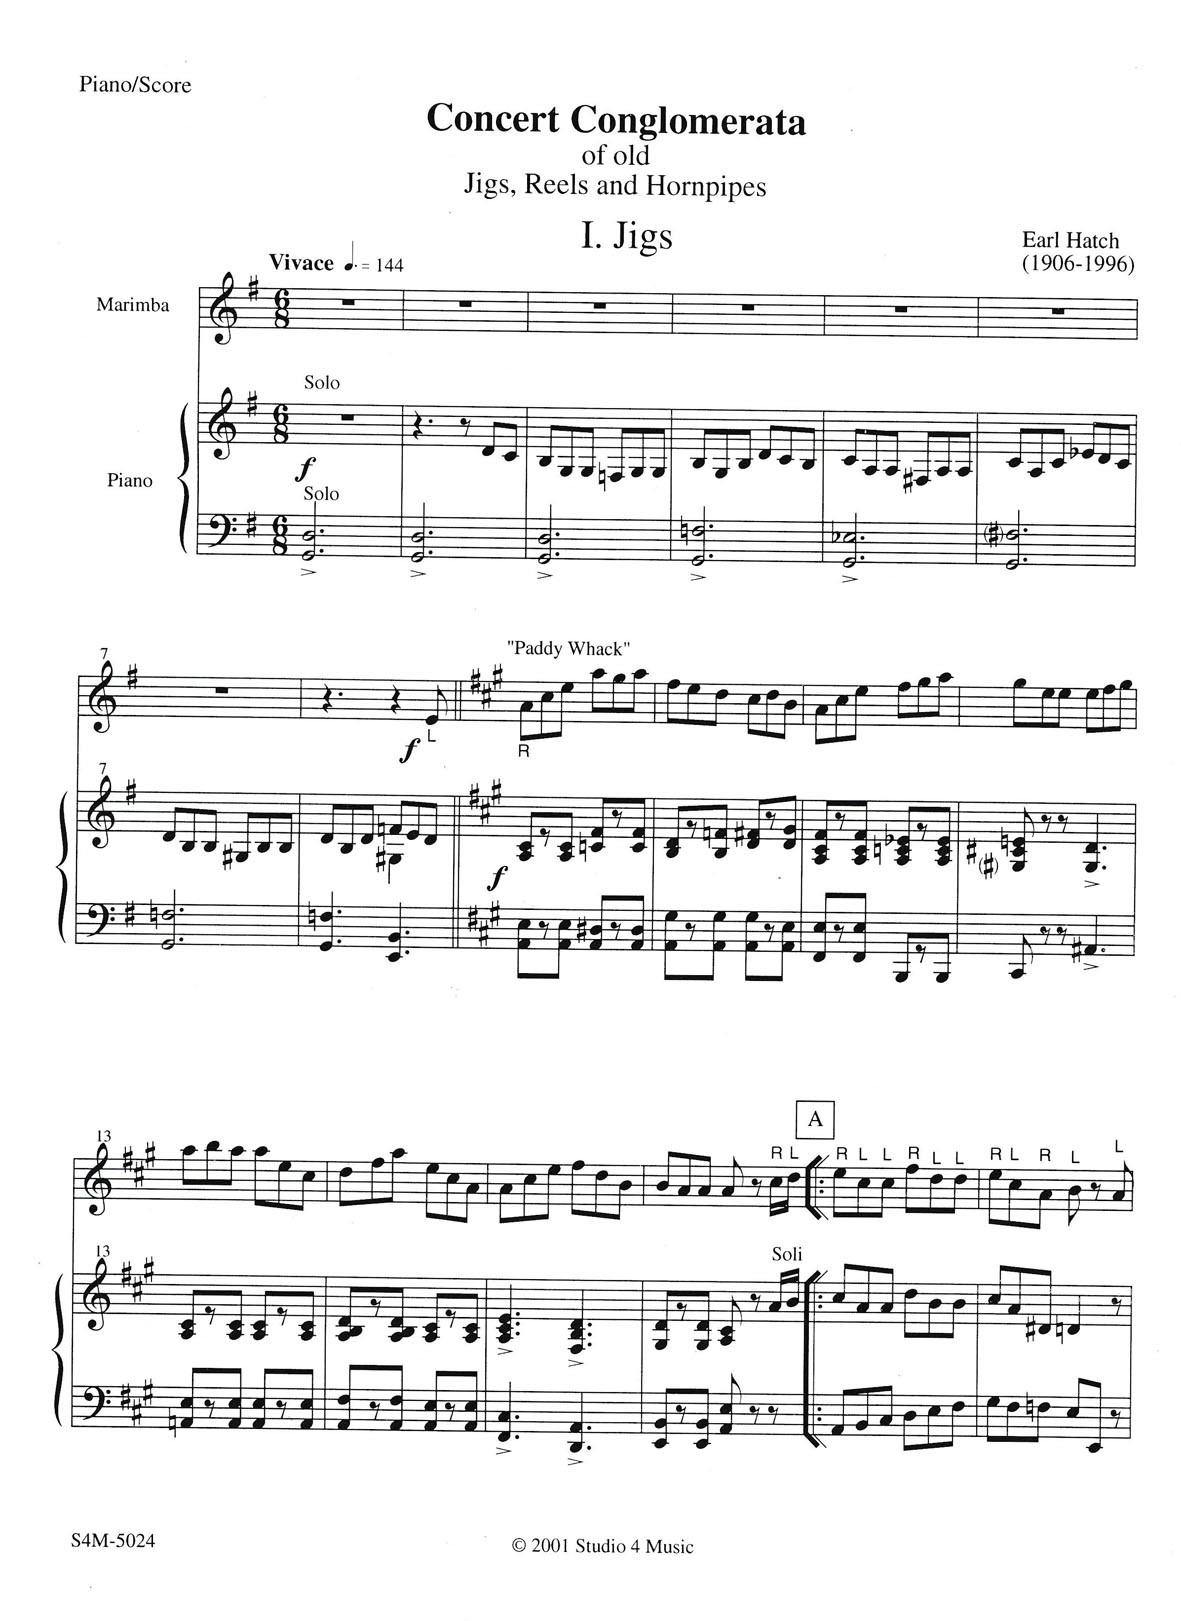 Concerto Conglomerata of Old Jigs, Reels and Hornpipes arr. Earl Hatch